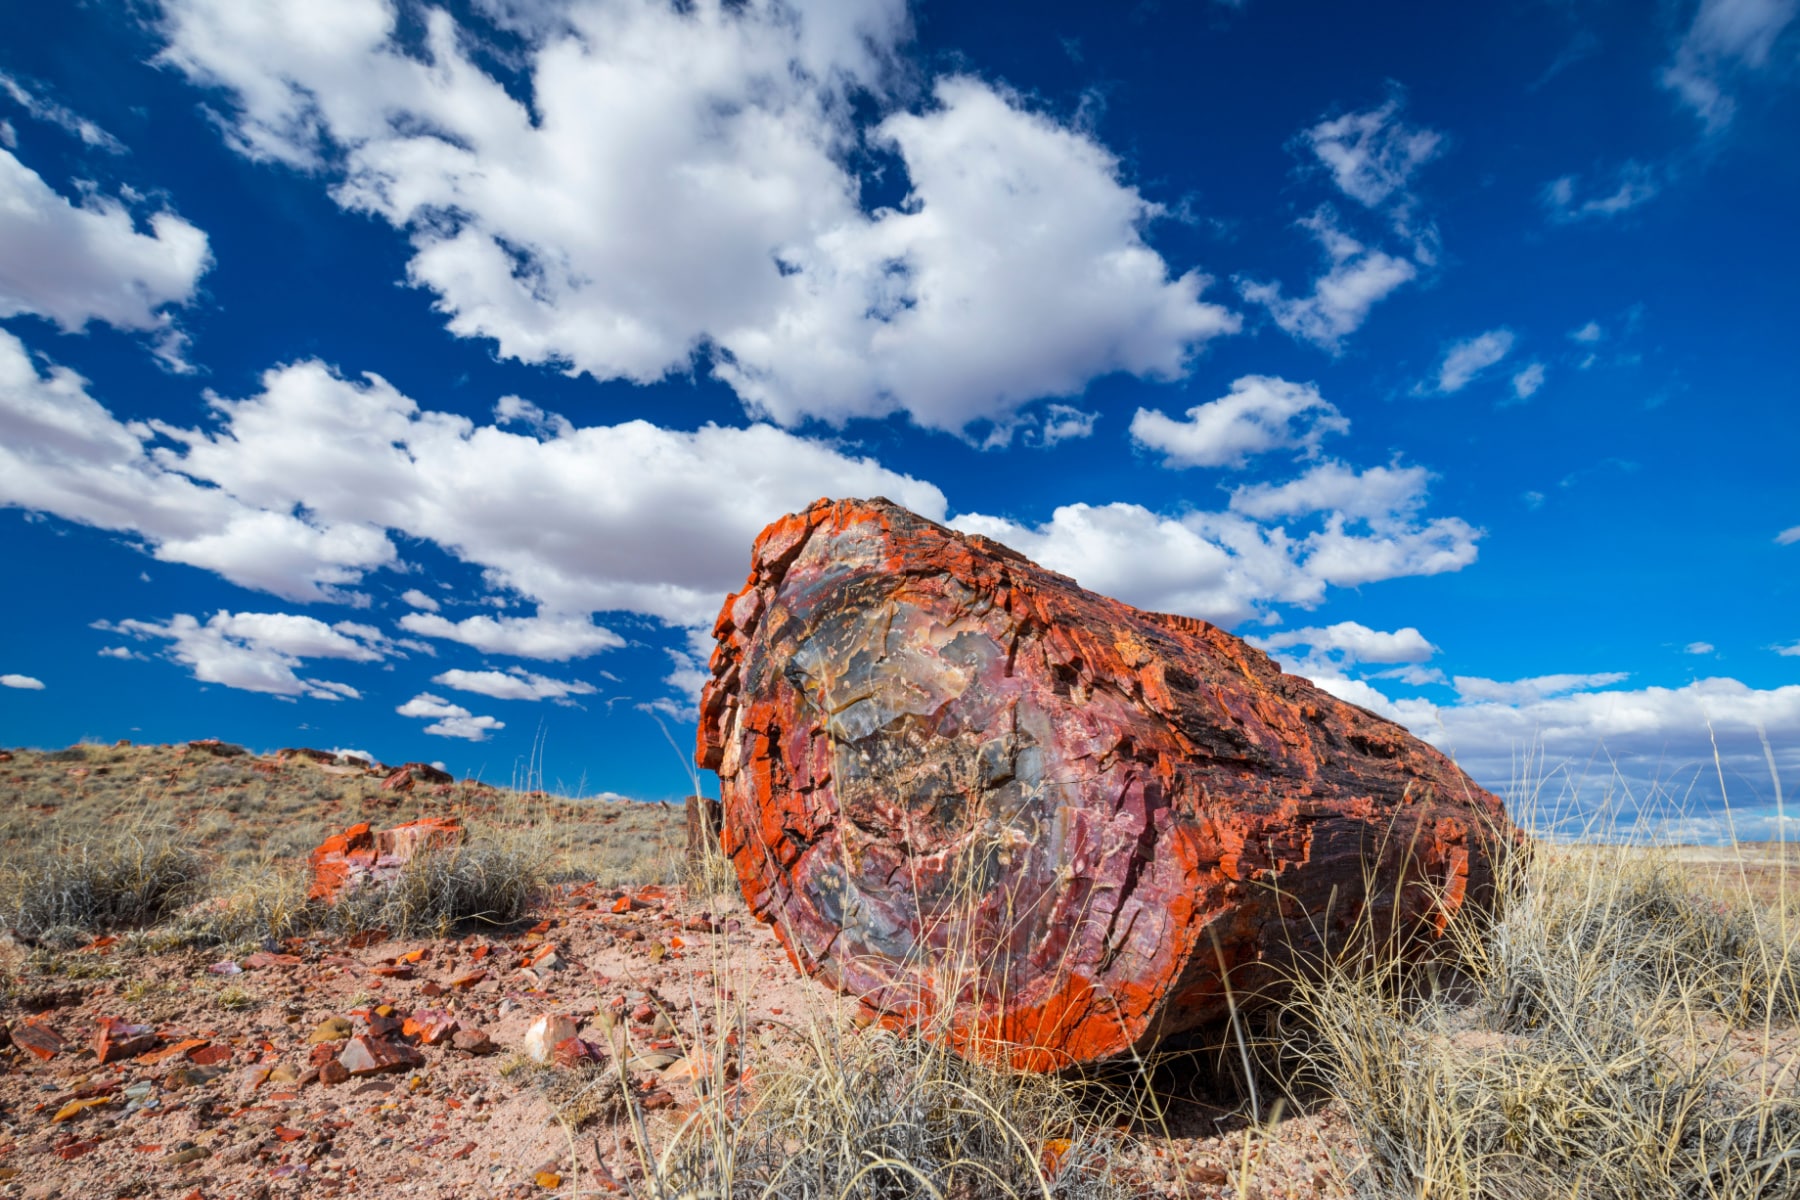 Petrified wood with scatterings of wood pieces around under a blue and white cloud-filled sky.